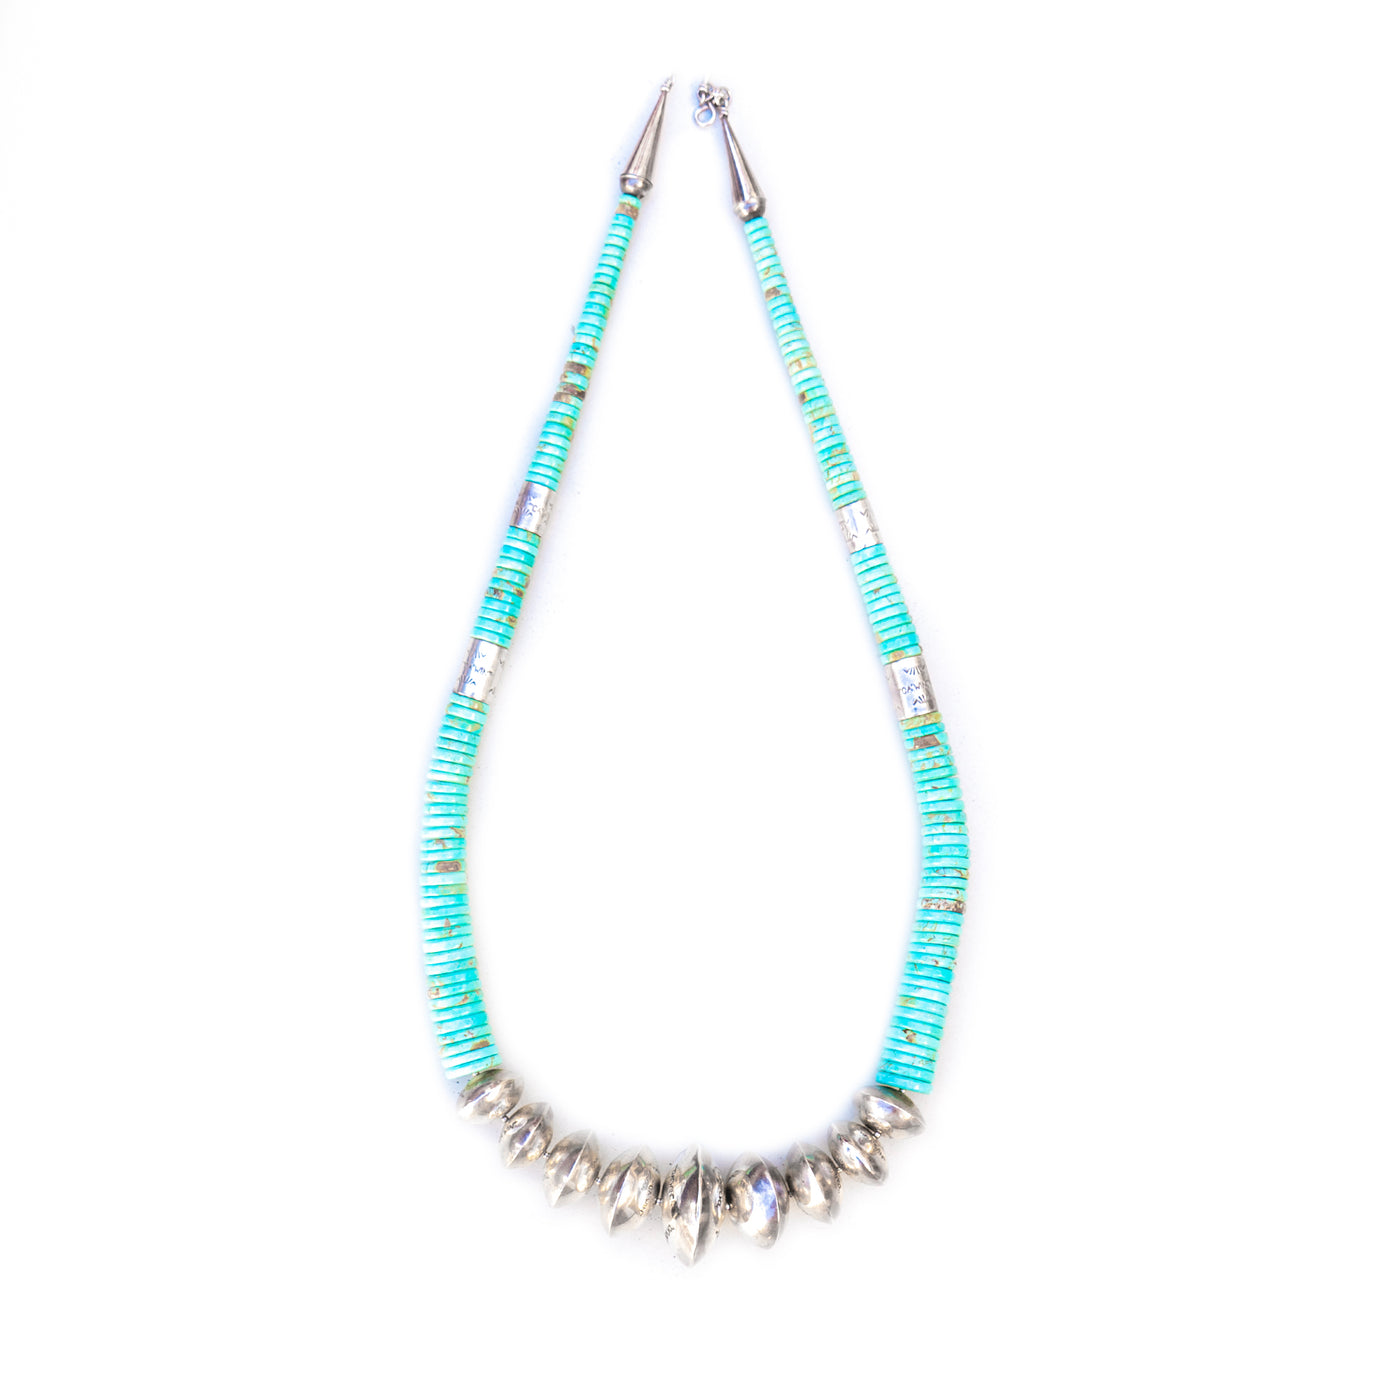 Turquoise and Silver Bead Necklace